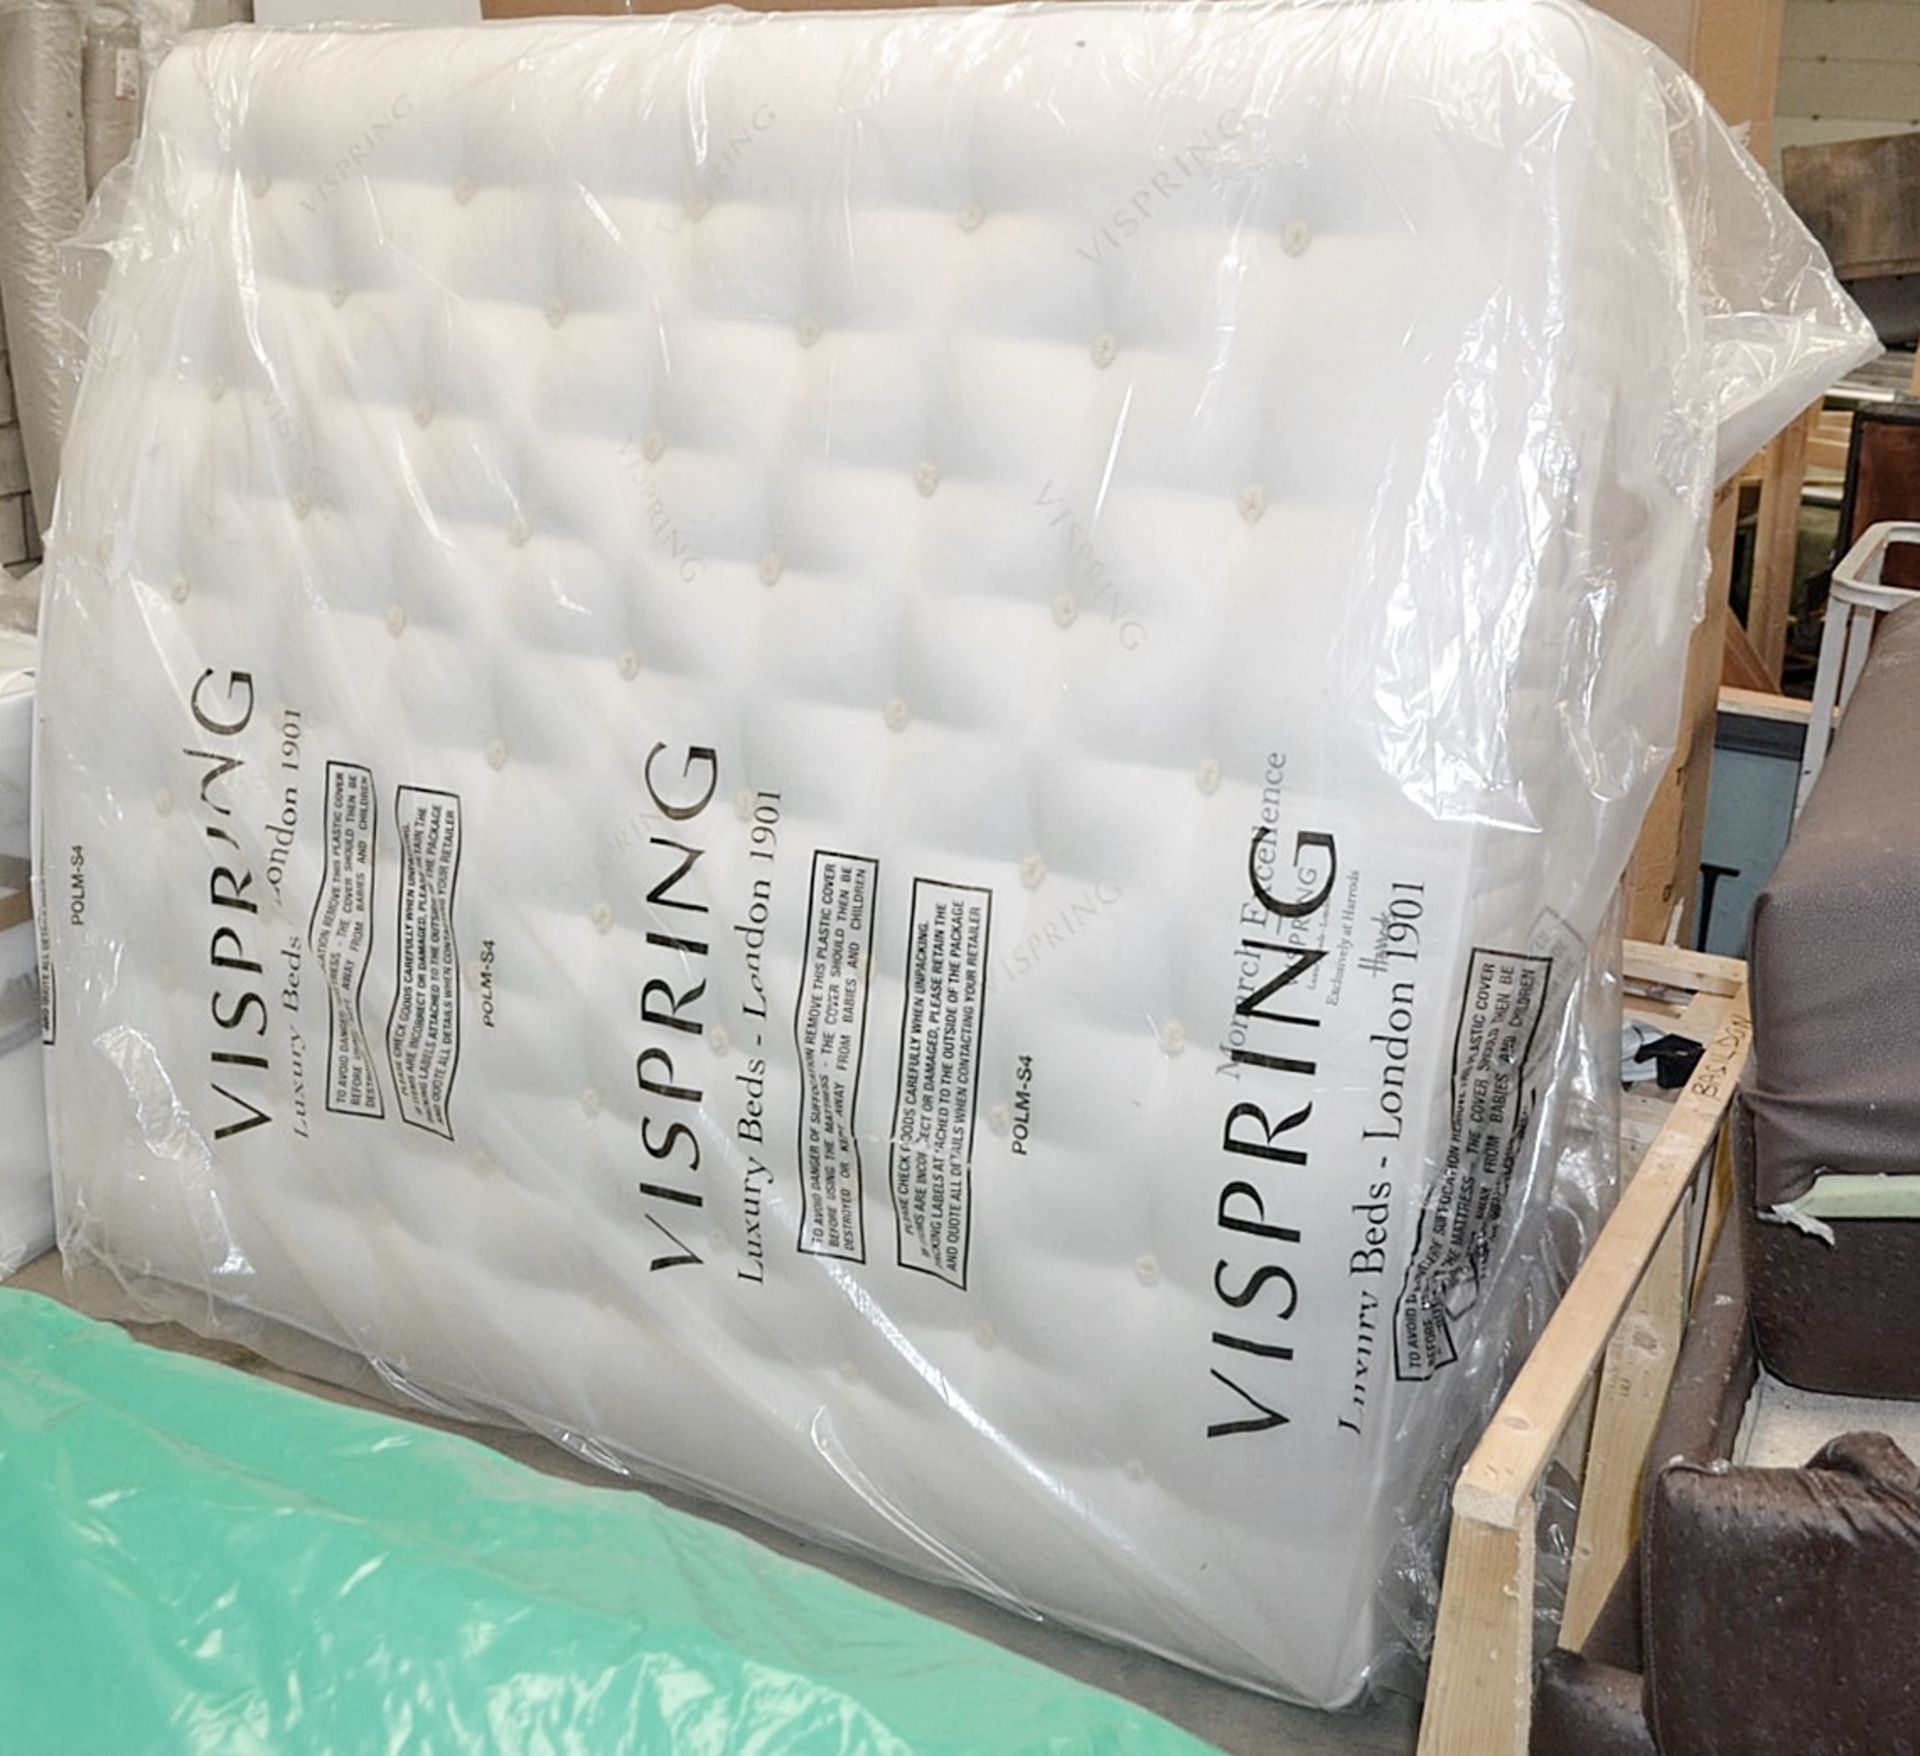 1 x Vispring 'Monarch Excellence' Triple Pocket Spring Mattress - Extra Firmness - Very Exclusive - Image 2 of 11